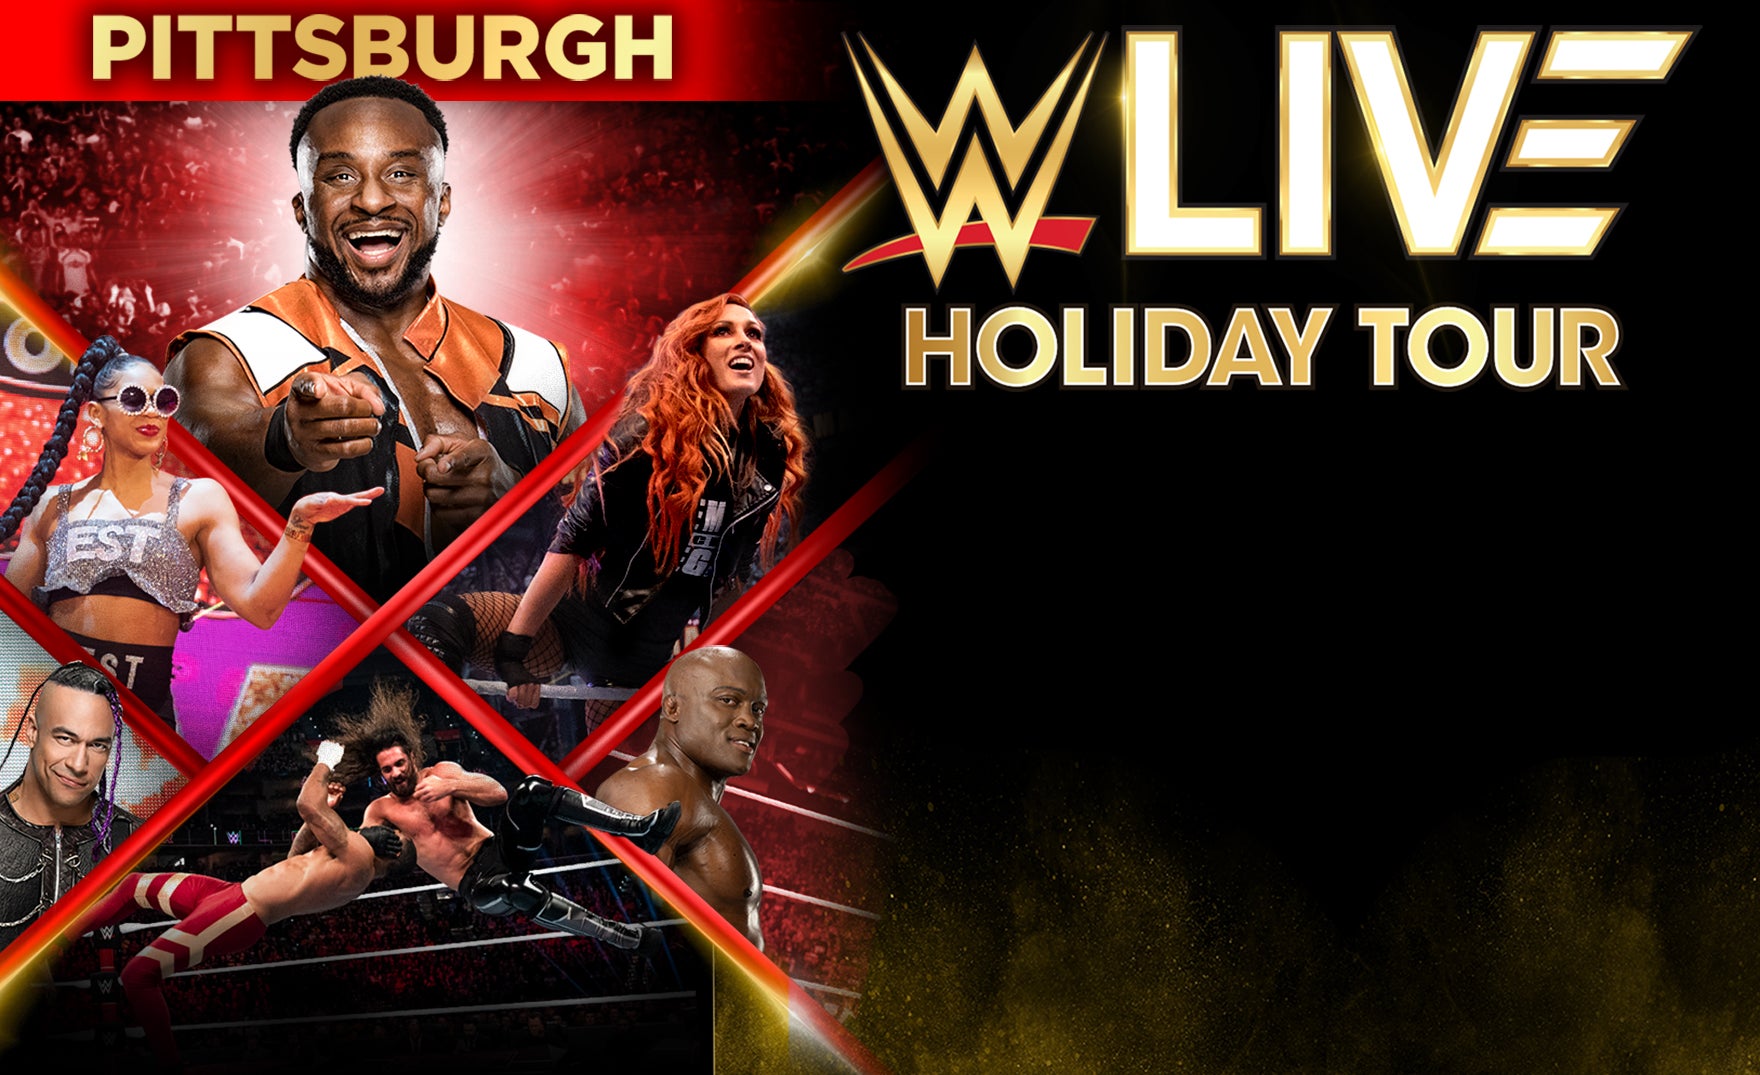 WWE Live Holiday Tour PPG Paints Arena